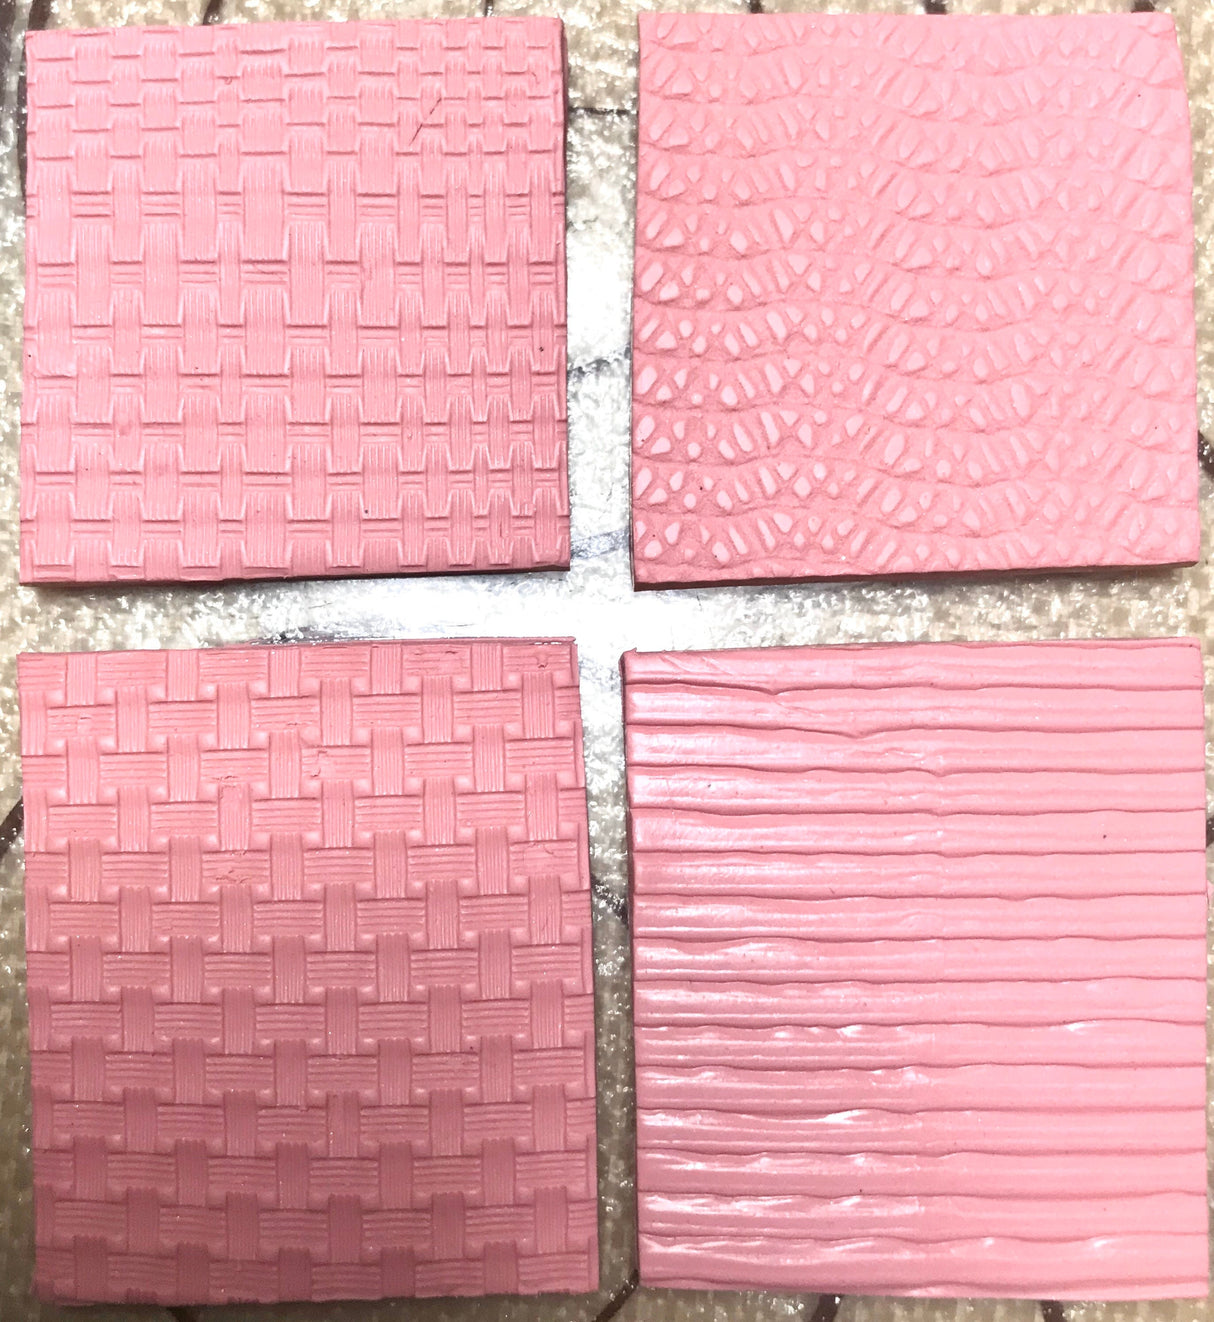 Polymer clay fabric texture sheets.